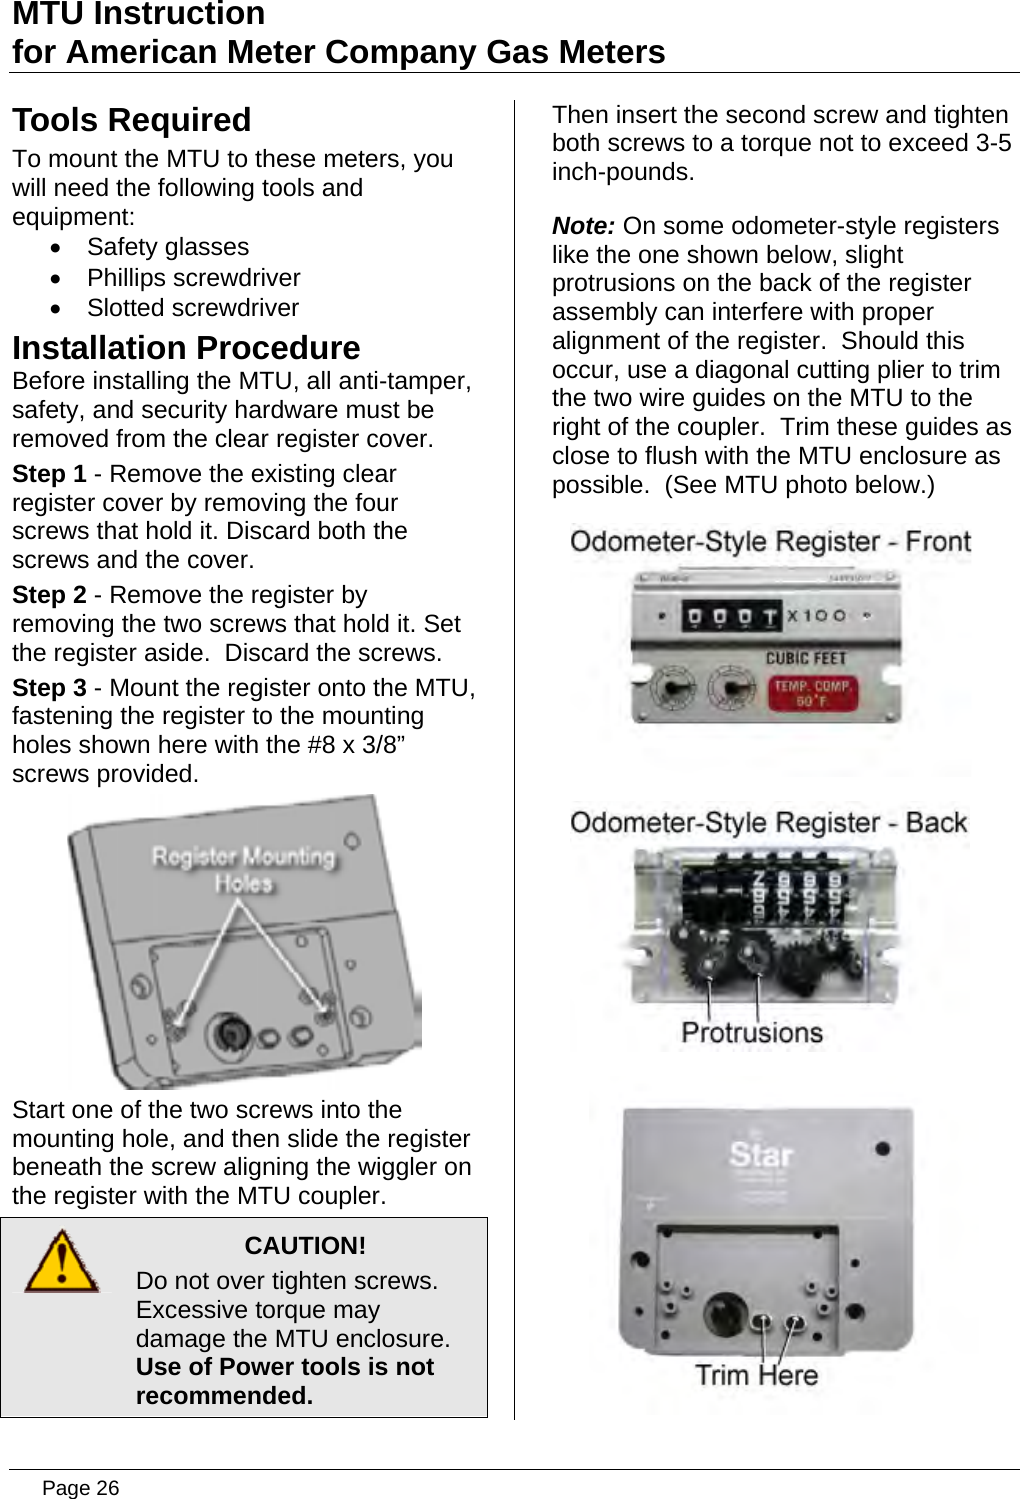 Page 26 of Aclara Technologies 09015 Transmitter for Meter Reading User Manual users manual